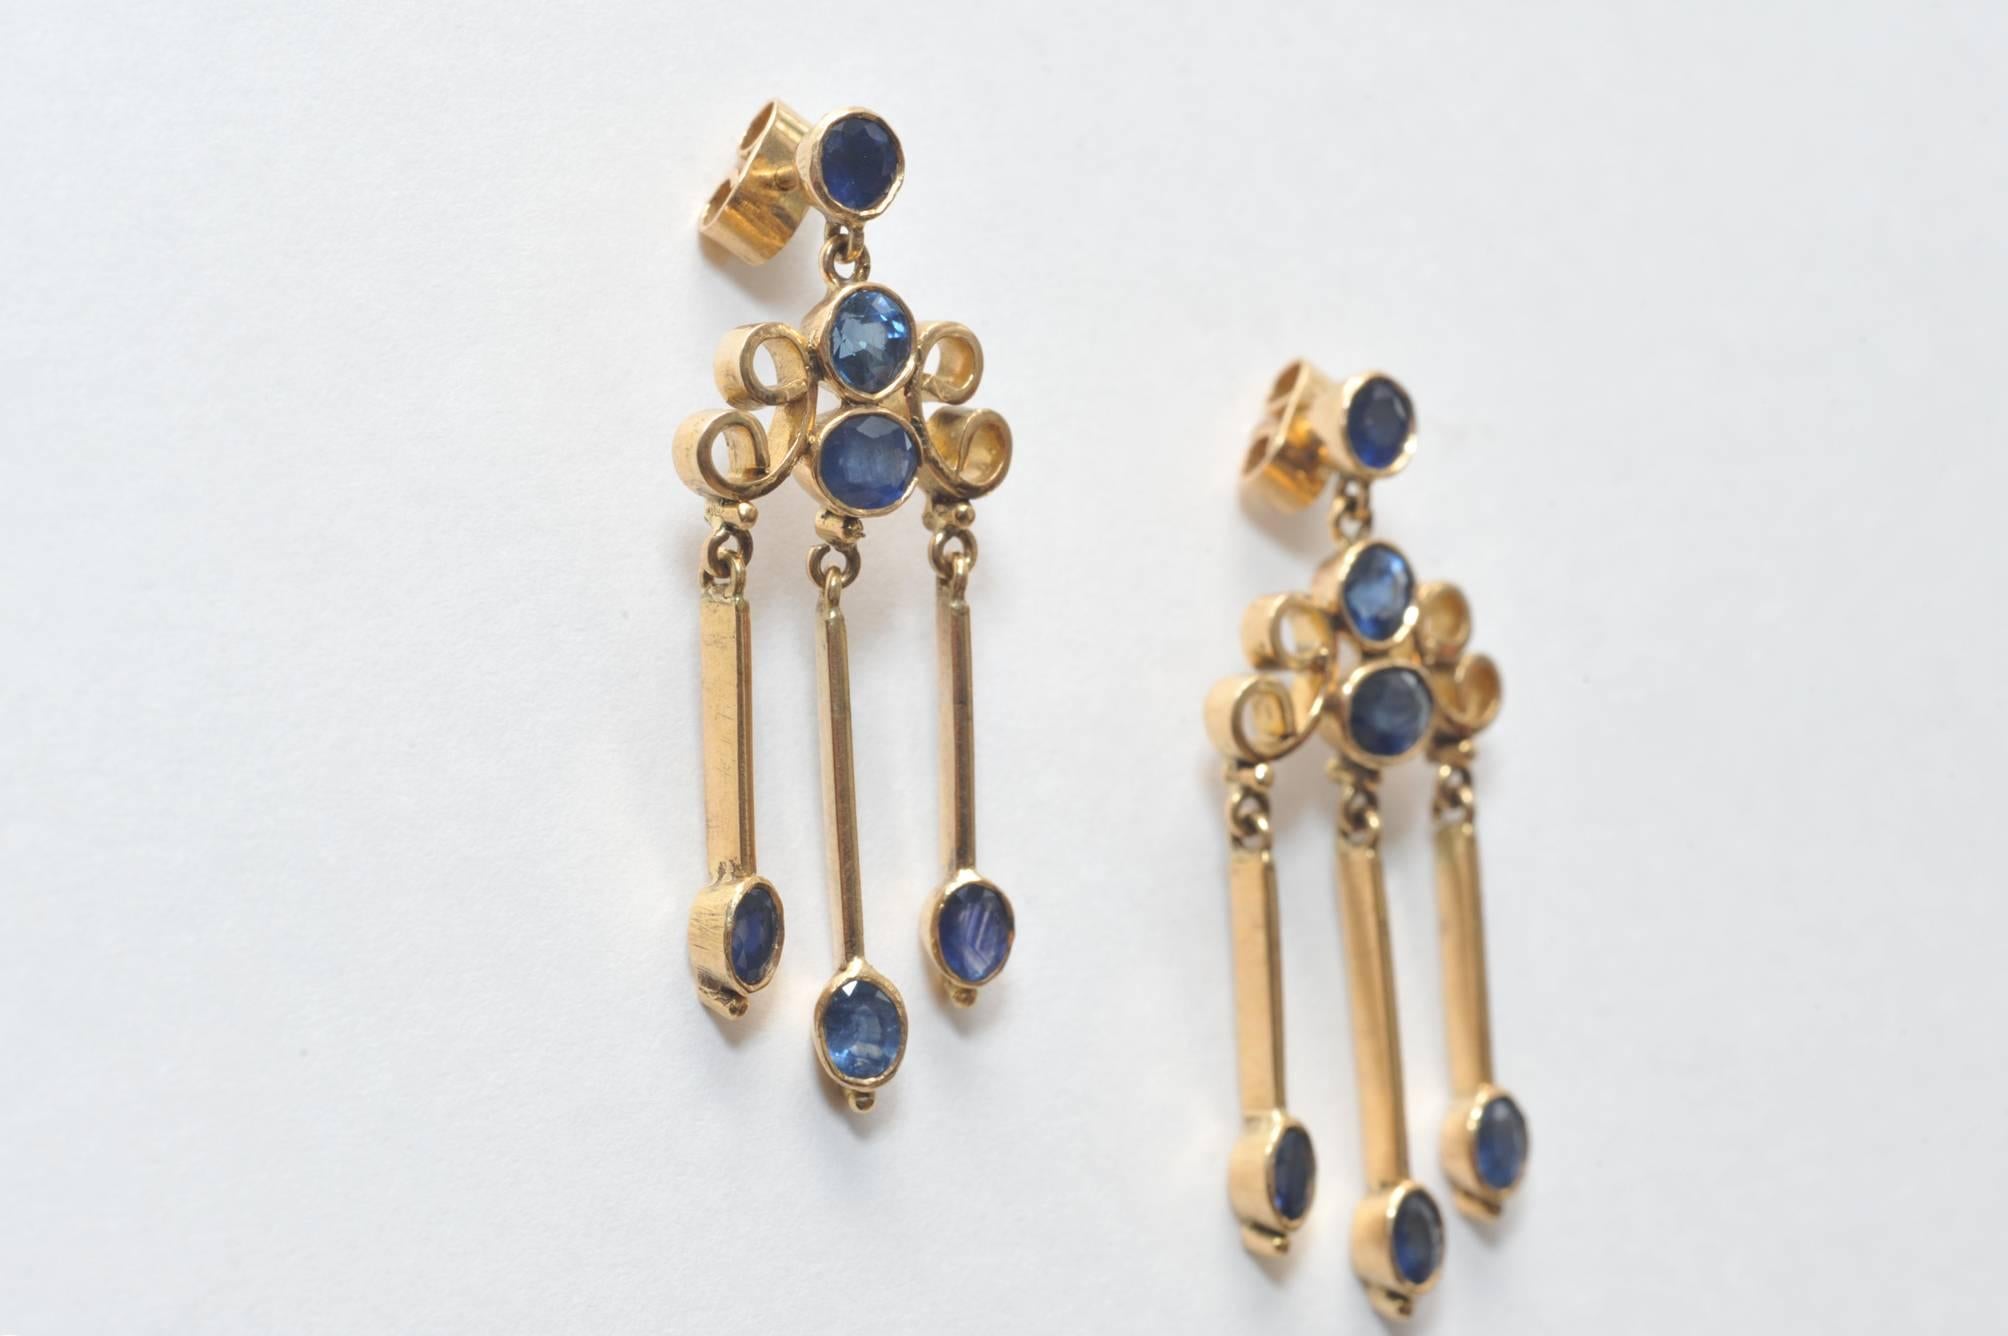 Pair of art deco period dangle earrings of 18K gold with faceted blue sapphires for pierced ears.  3.50 carats of sapphires.